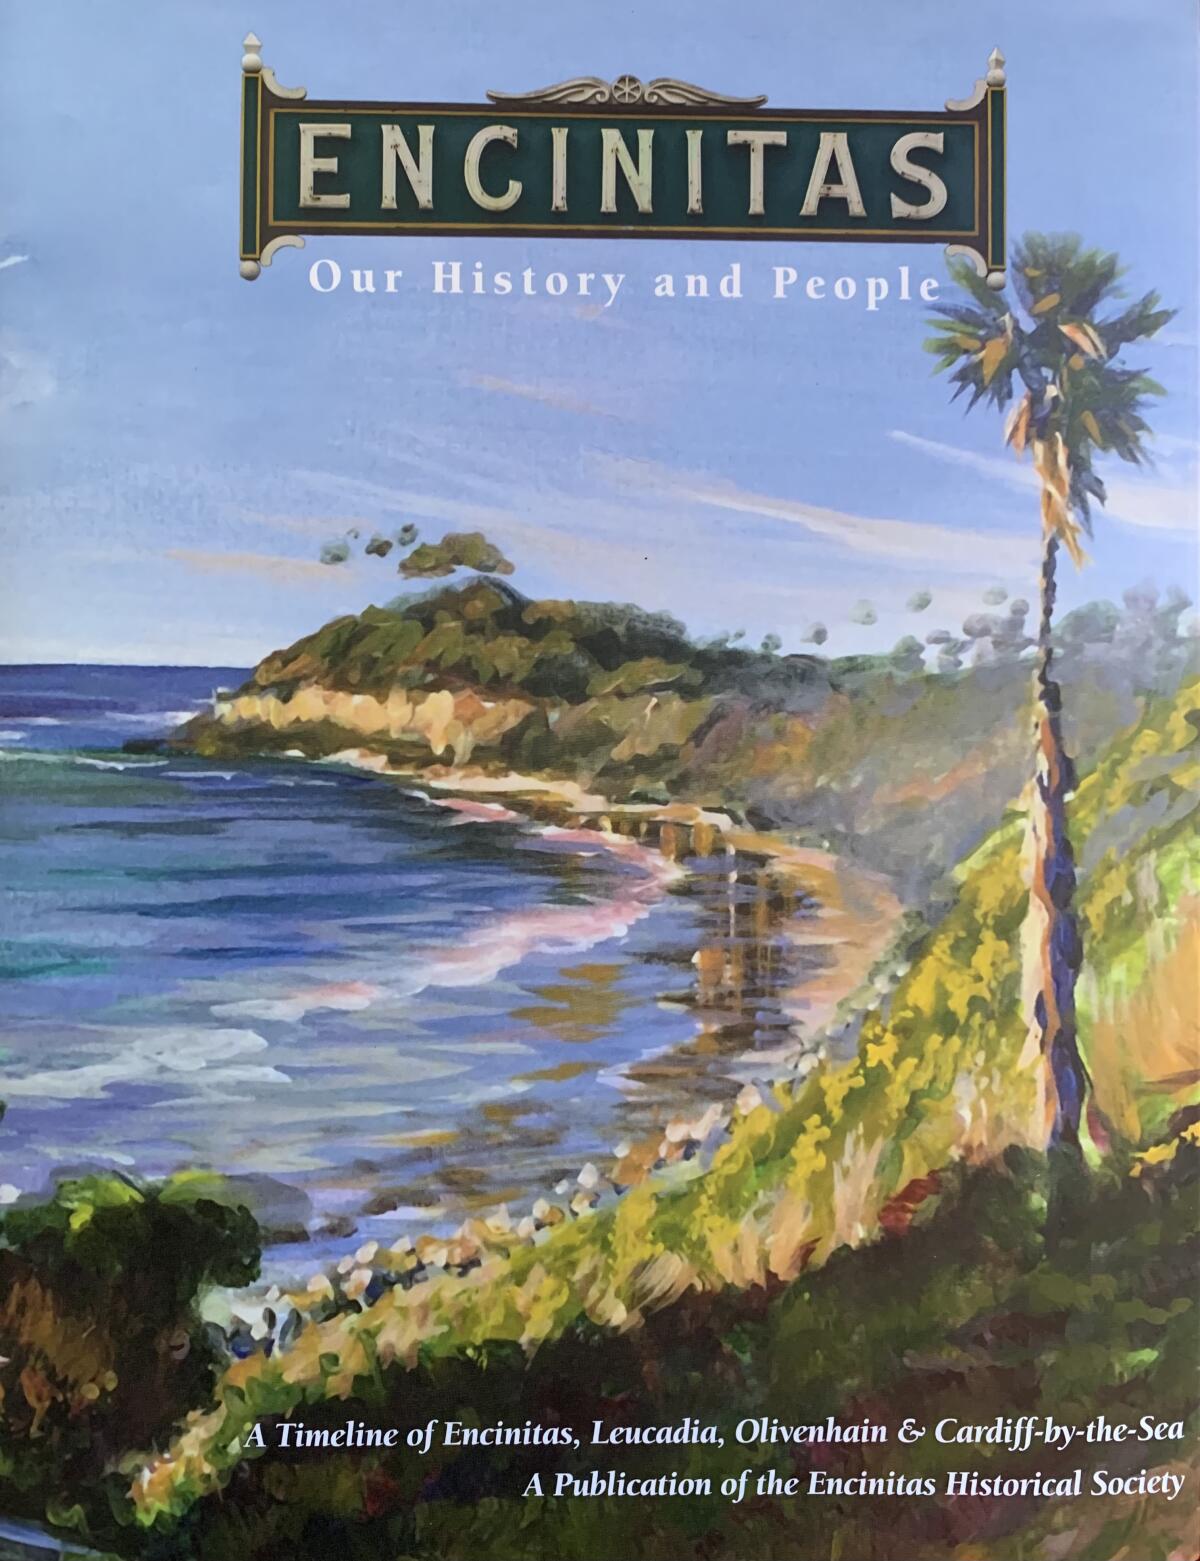 The cover of ‘Encinitas: Our History and People’